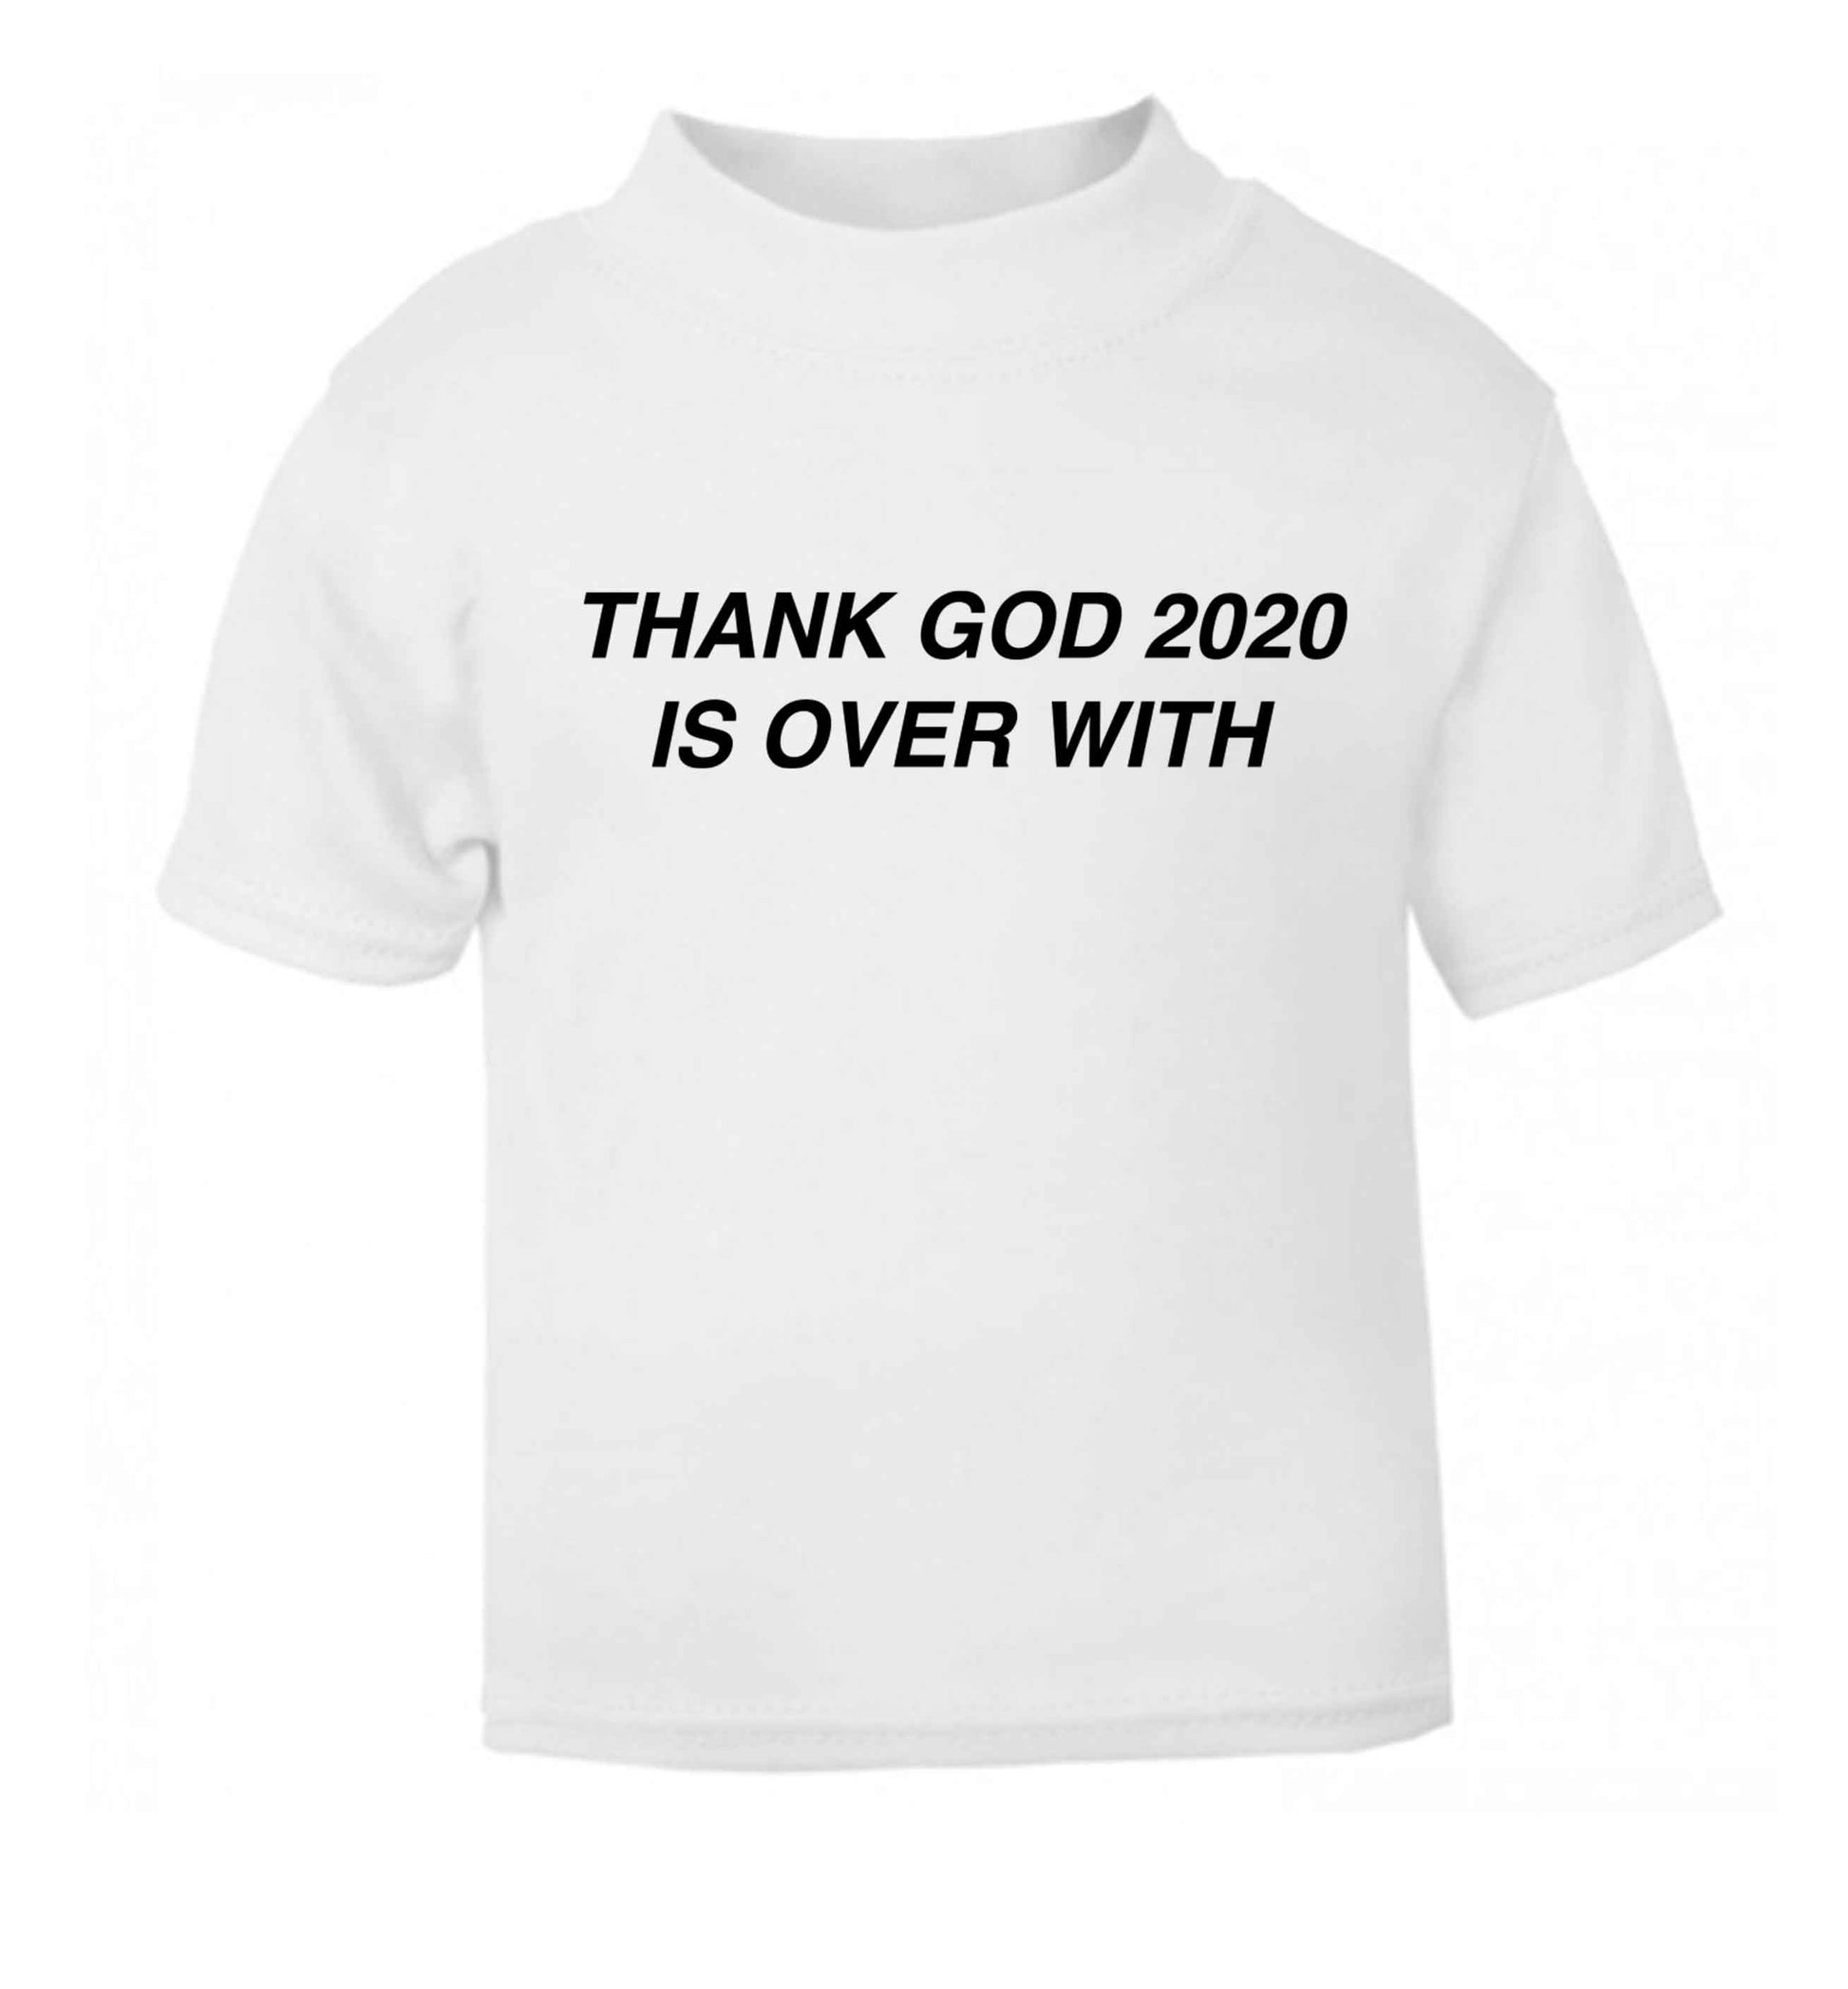 Thank god 2020 is over with baby toddler Tshirt 2 Years